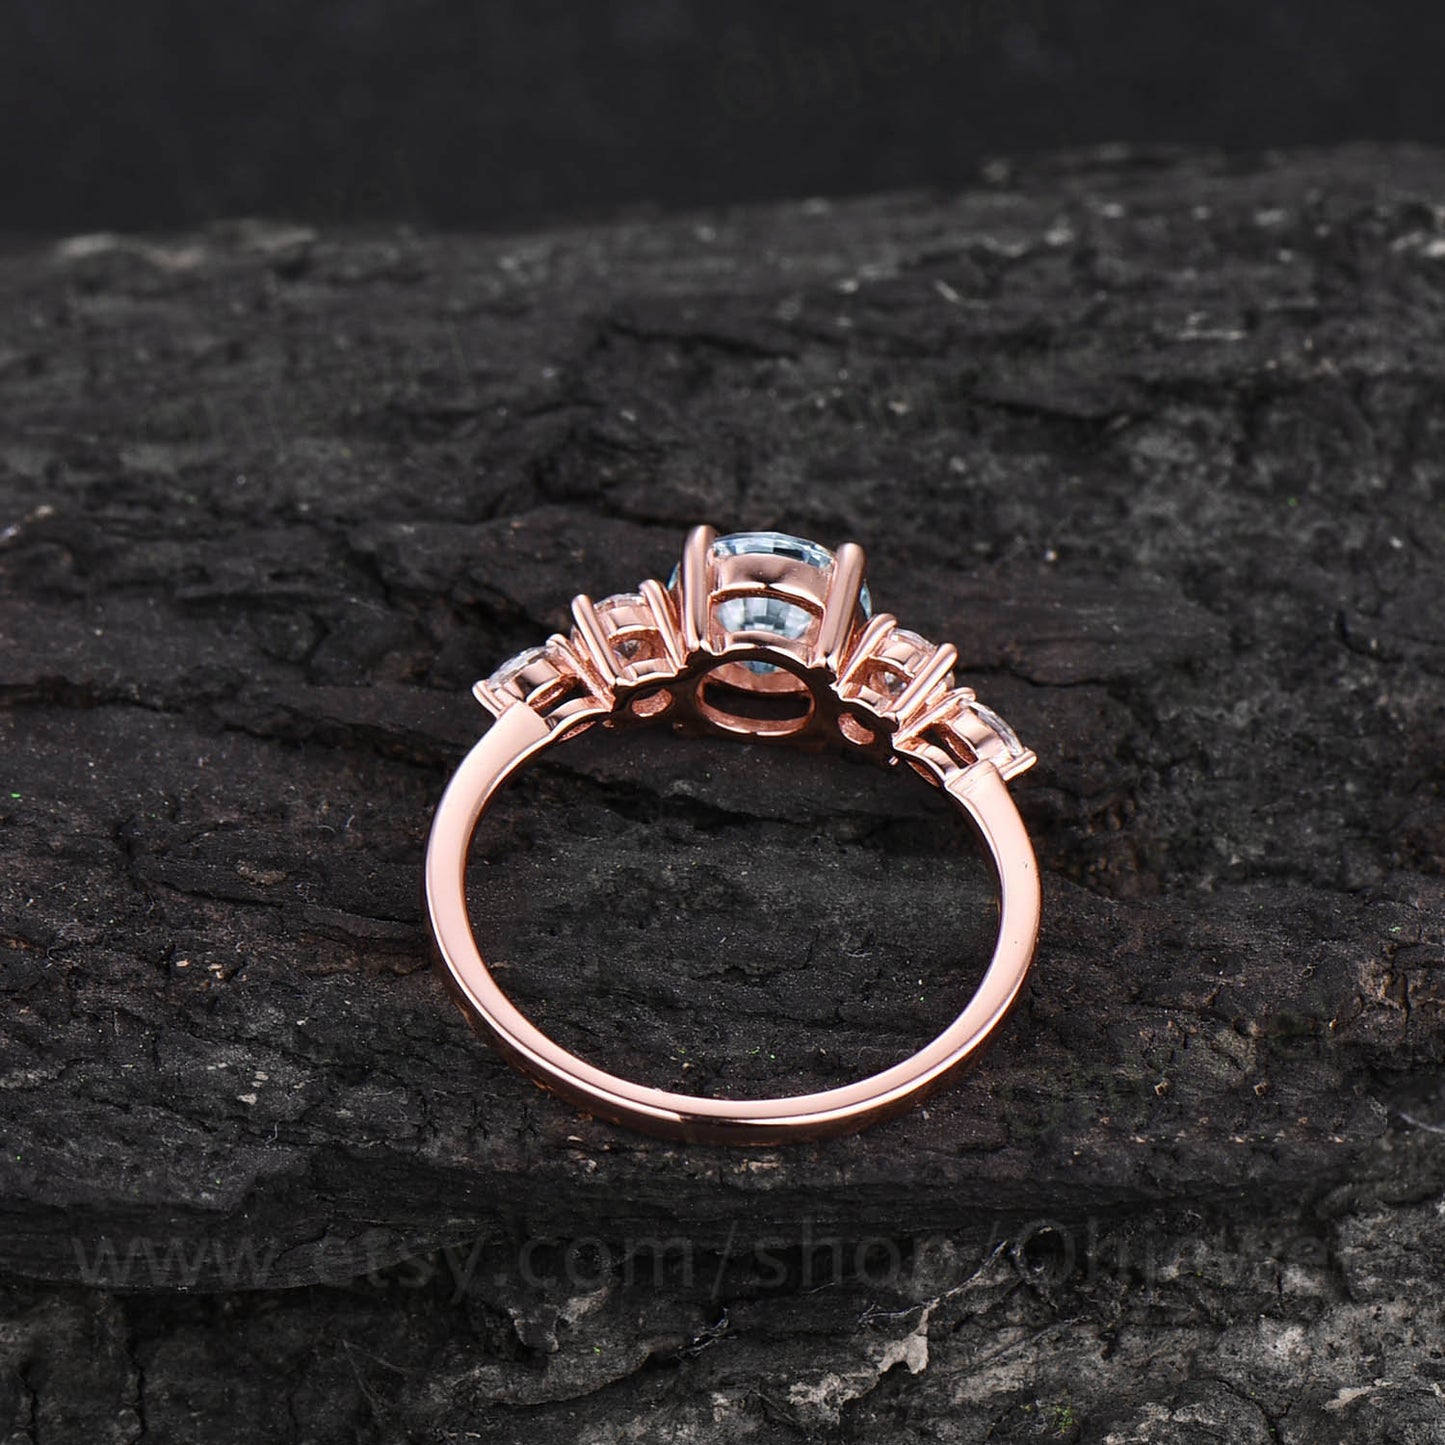 1ct round Aquamarine engagement ring five stone art deco rose gold silver ring women marquise custom ring dainty March birthstone ring gift